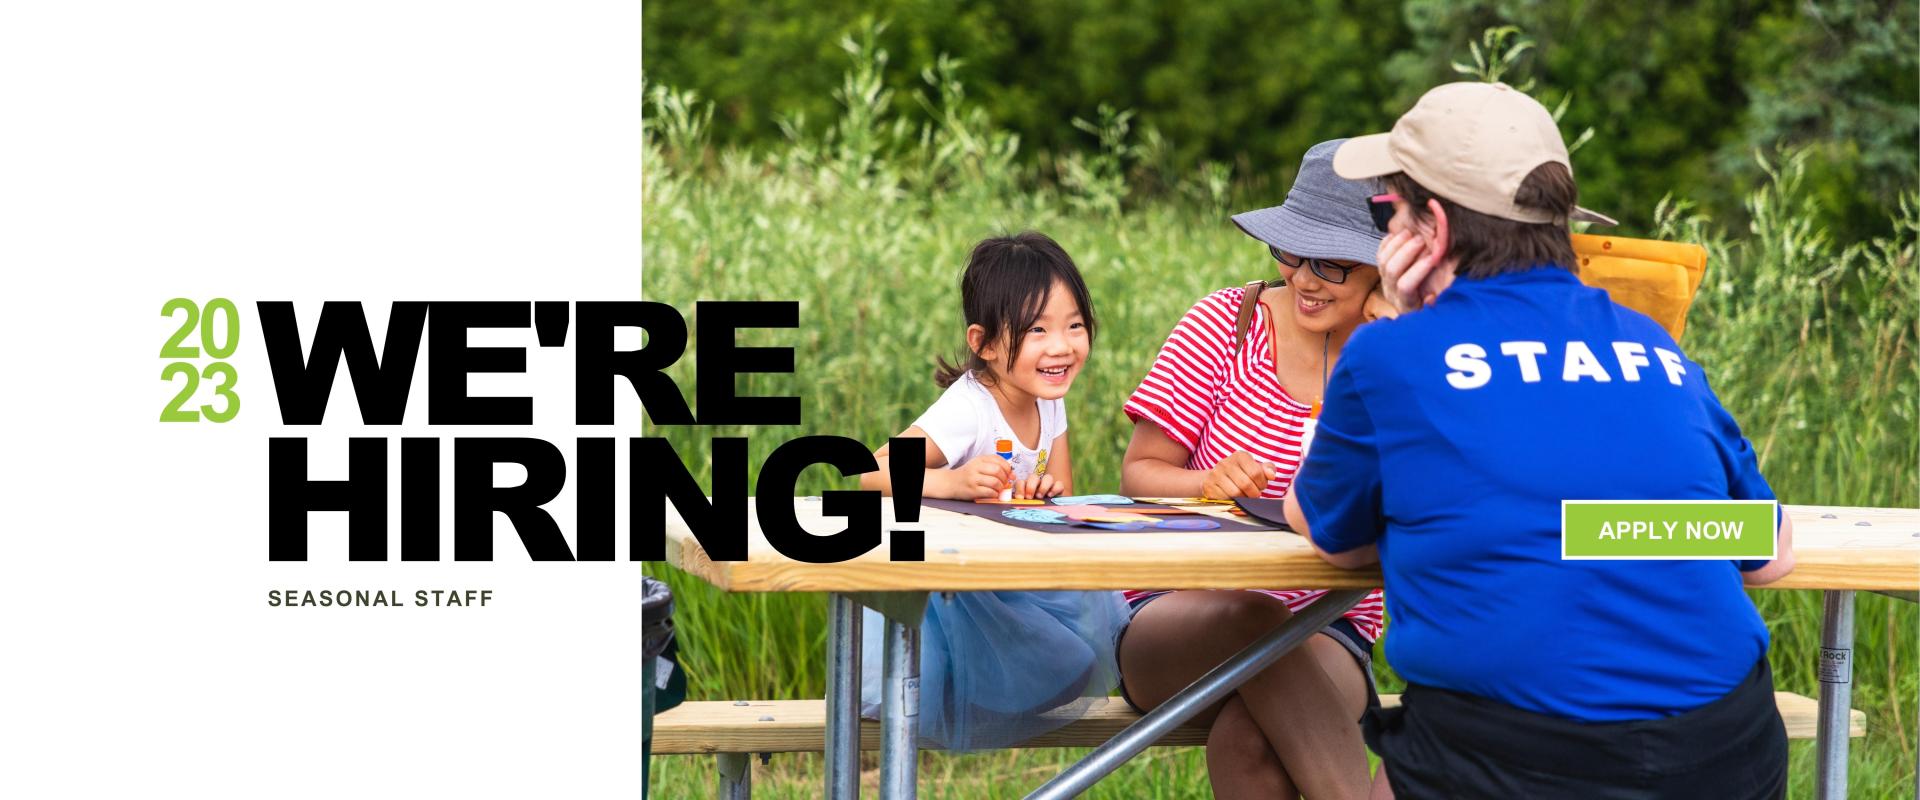 2023 WE'RE HIRING - SEASONAL STAFF - over a picture of a staff member in a blue shirt sitting at a table with a woman and a child coloring in a park